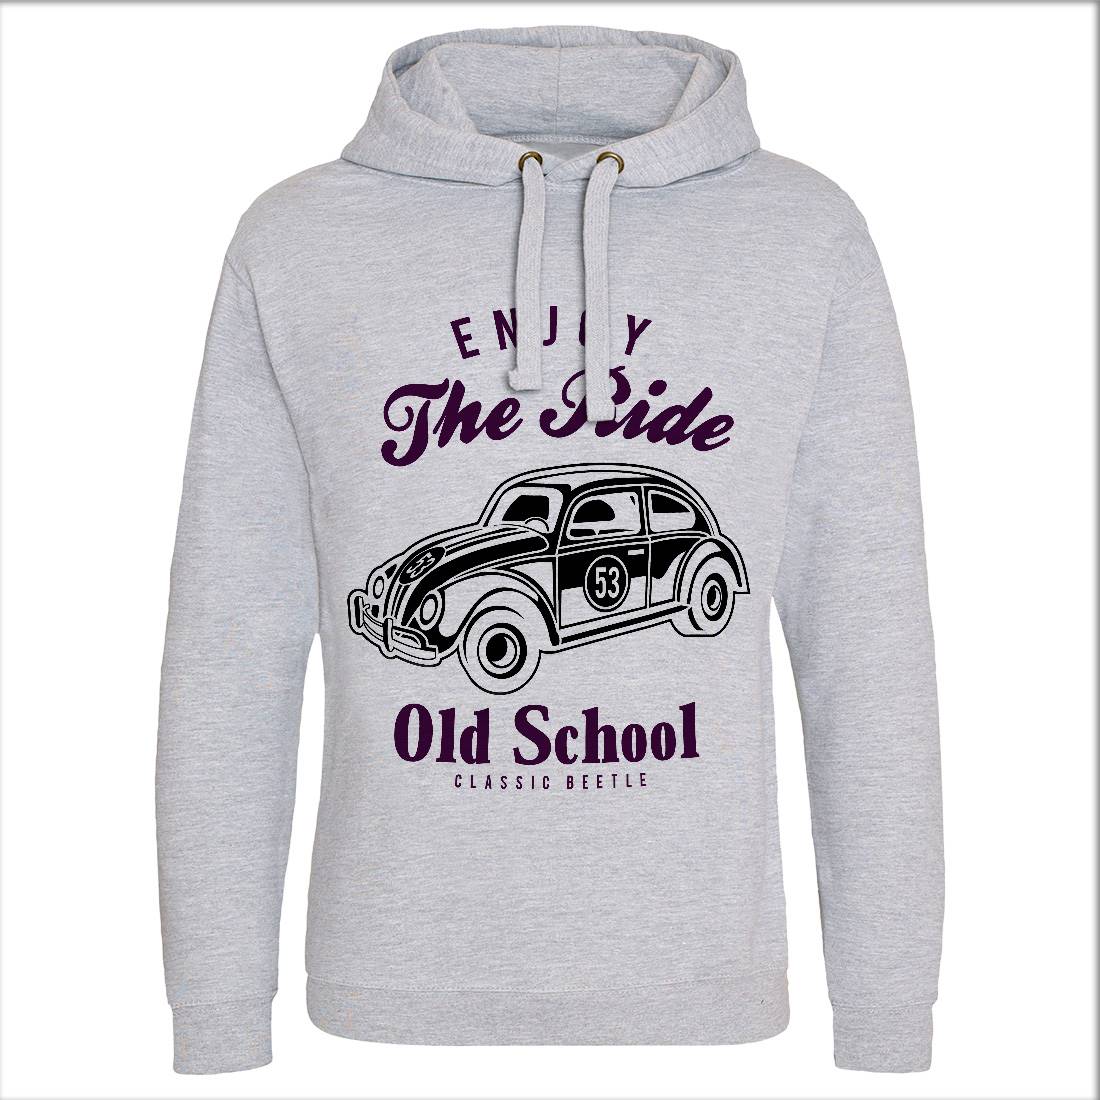 Enjoy The Ride Mens Hoodie Without Pocket Cars A047